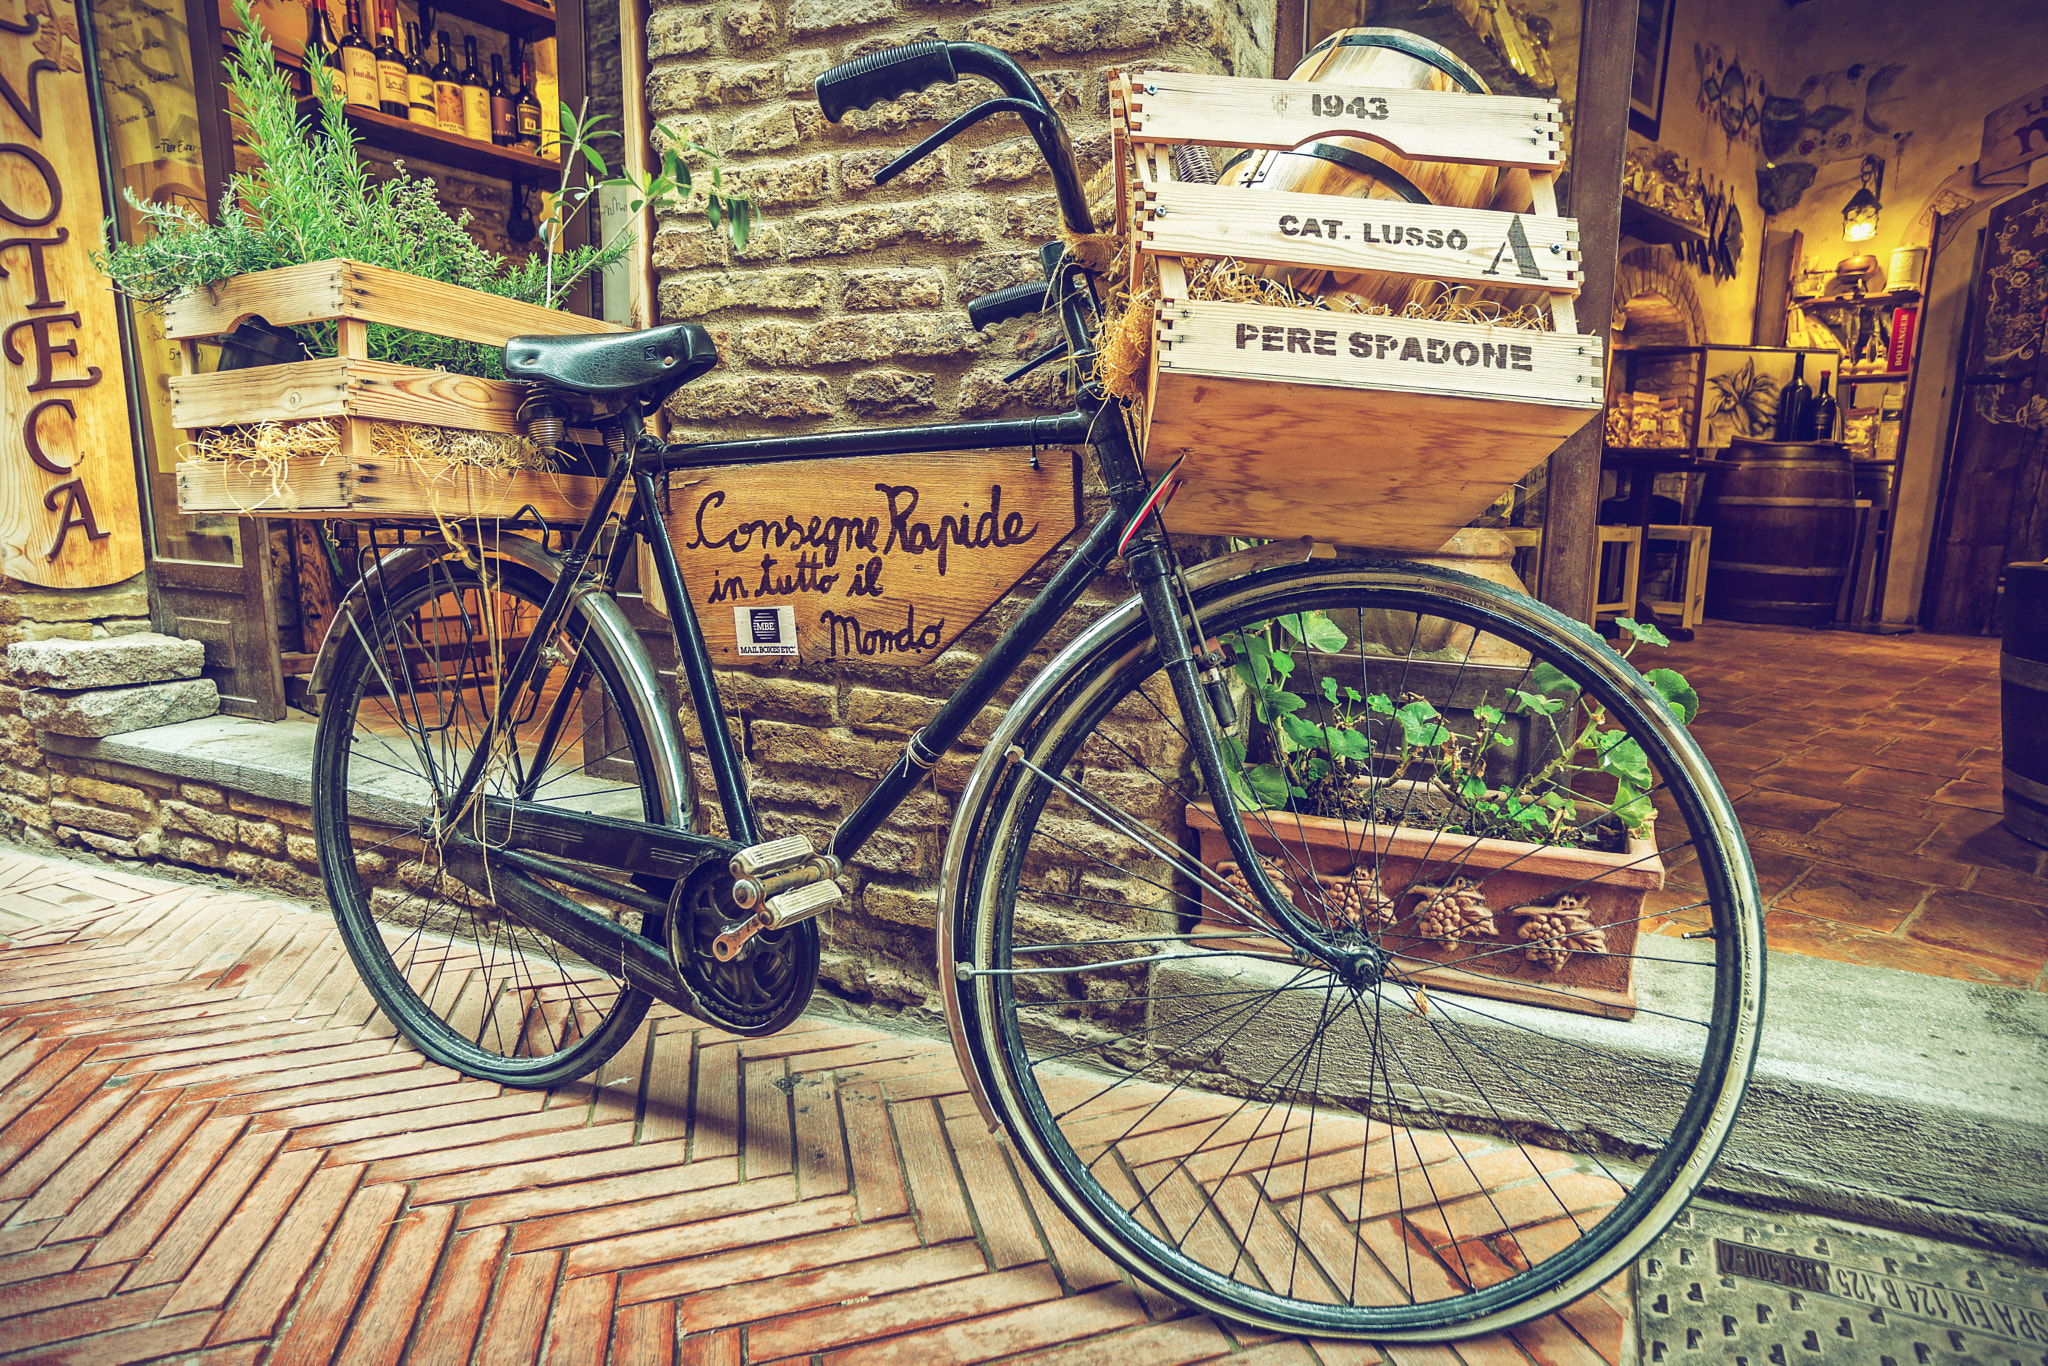 Sony a99 II sample photo. Bicycle retro, alley in old town, tuscany, italy photography